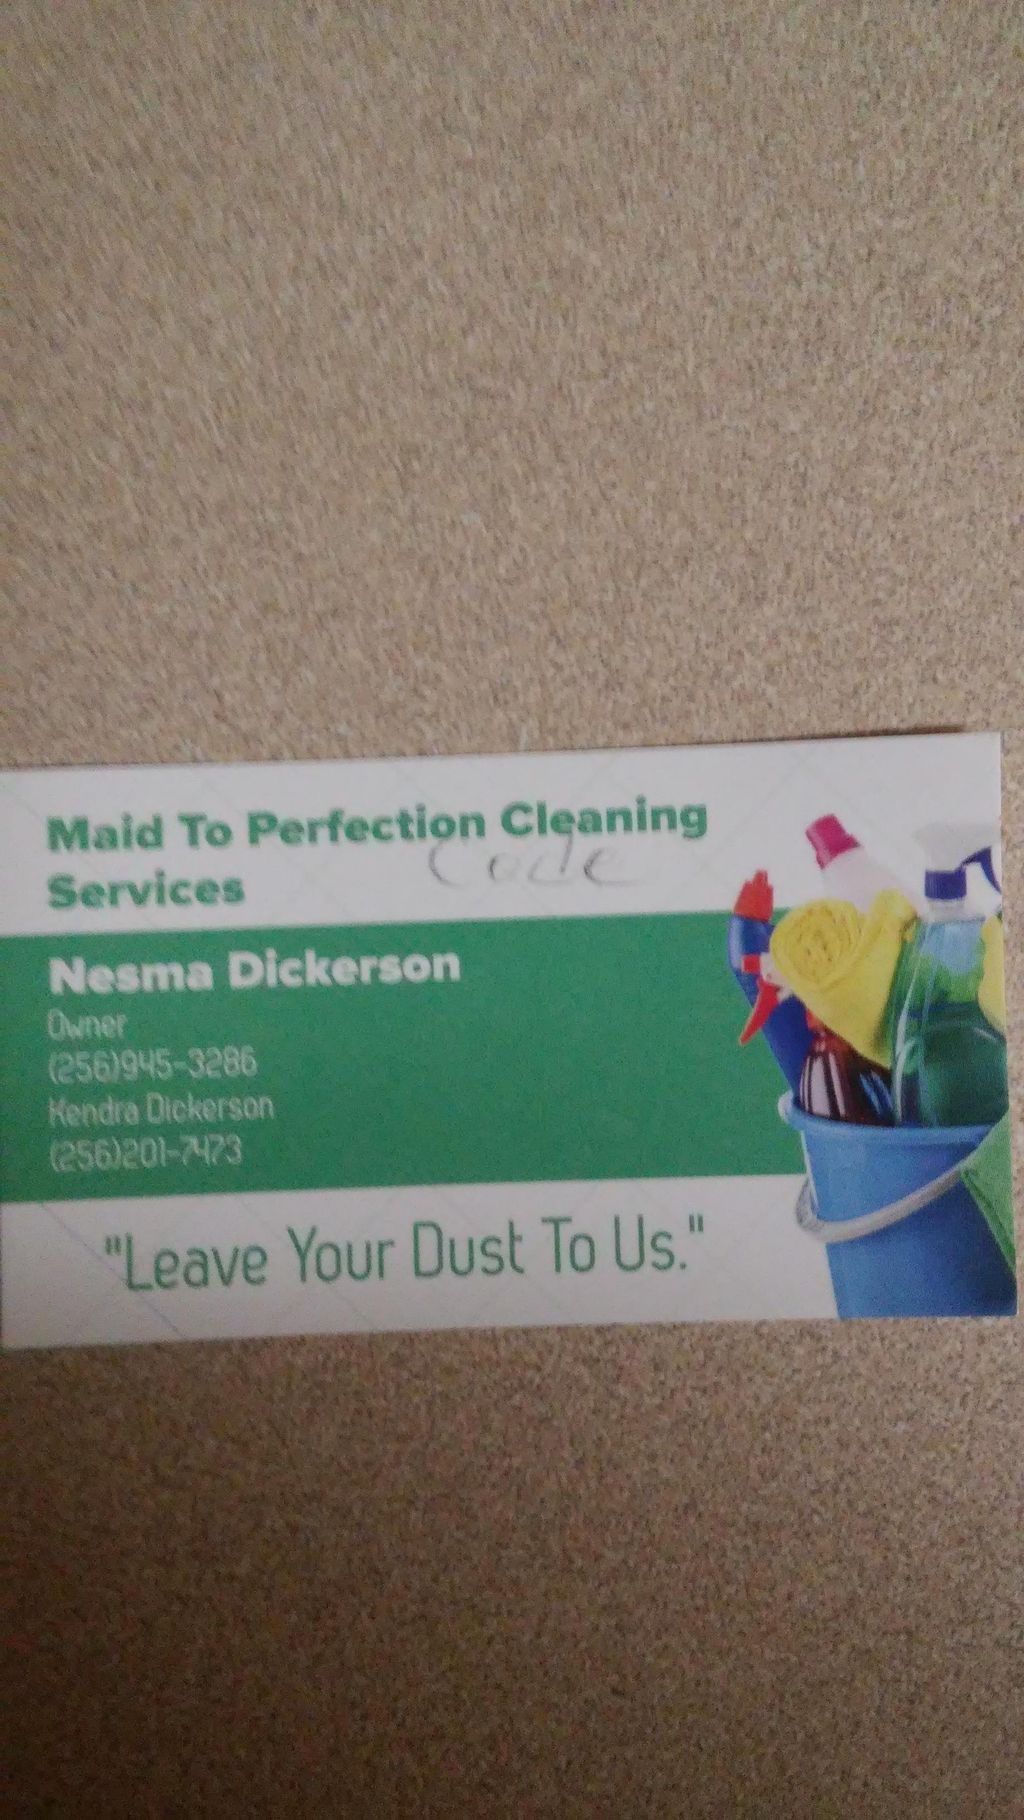 Maid To Perfection Cleaning Services